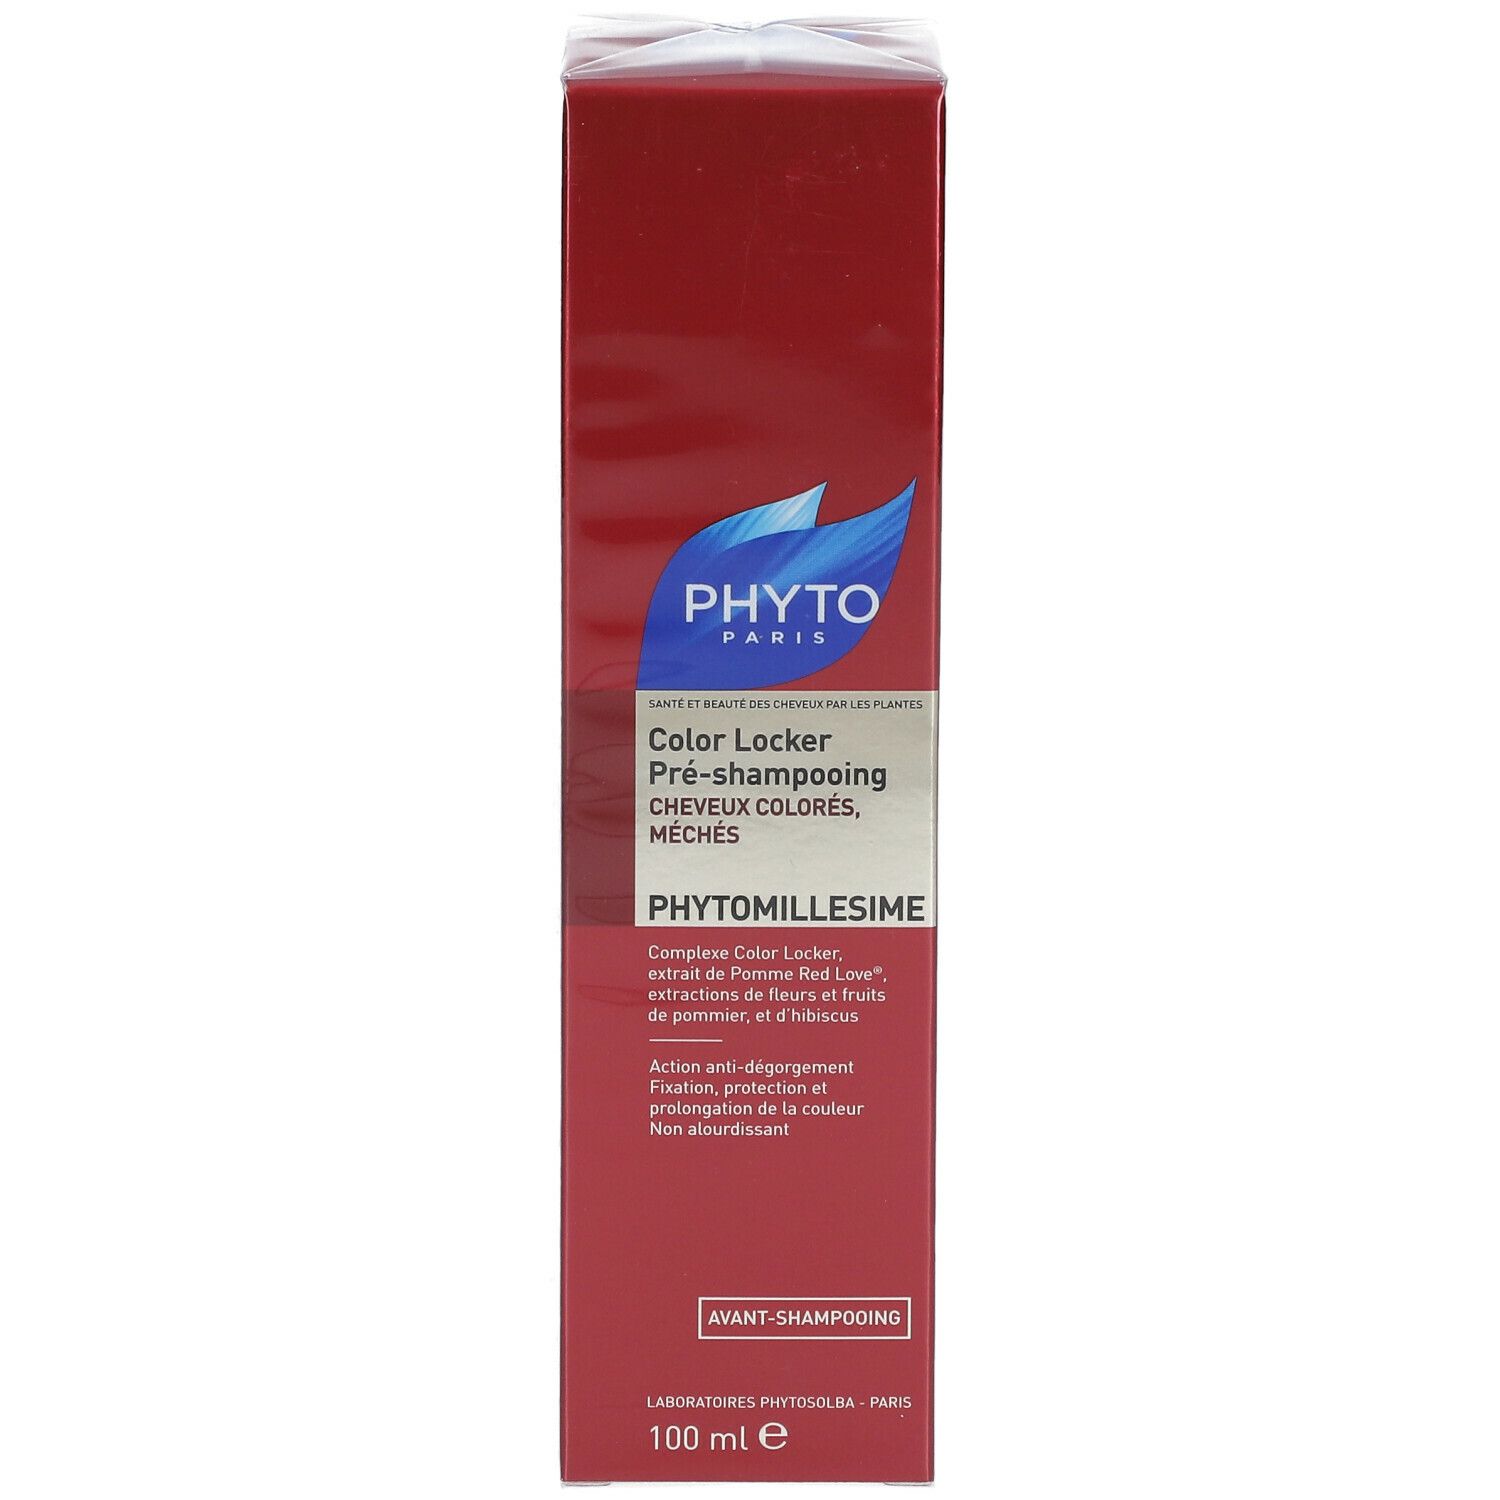 PHYTO PHYTOMILLESIME Color Locker pré-shampooing